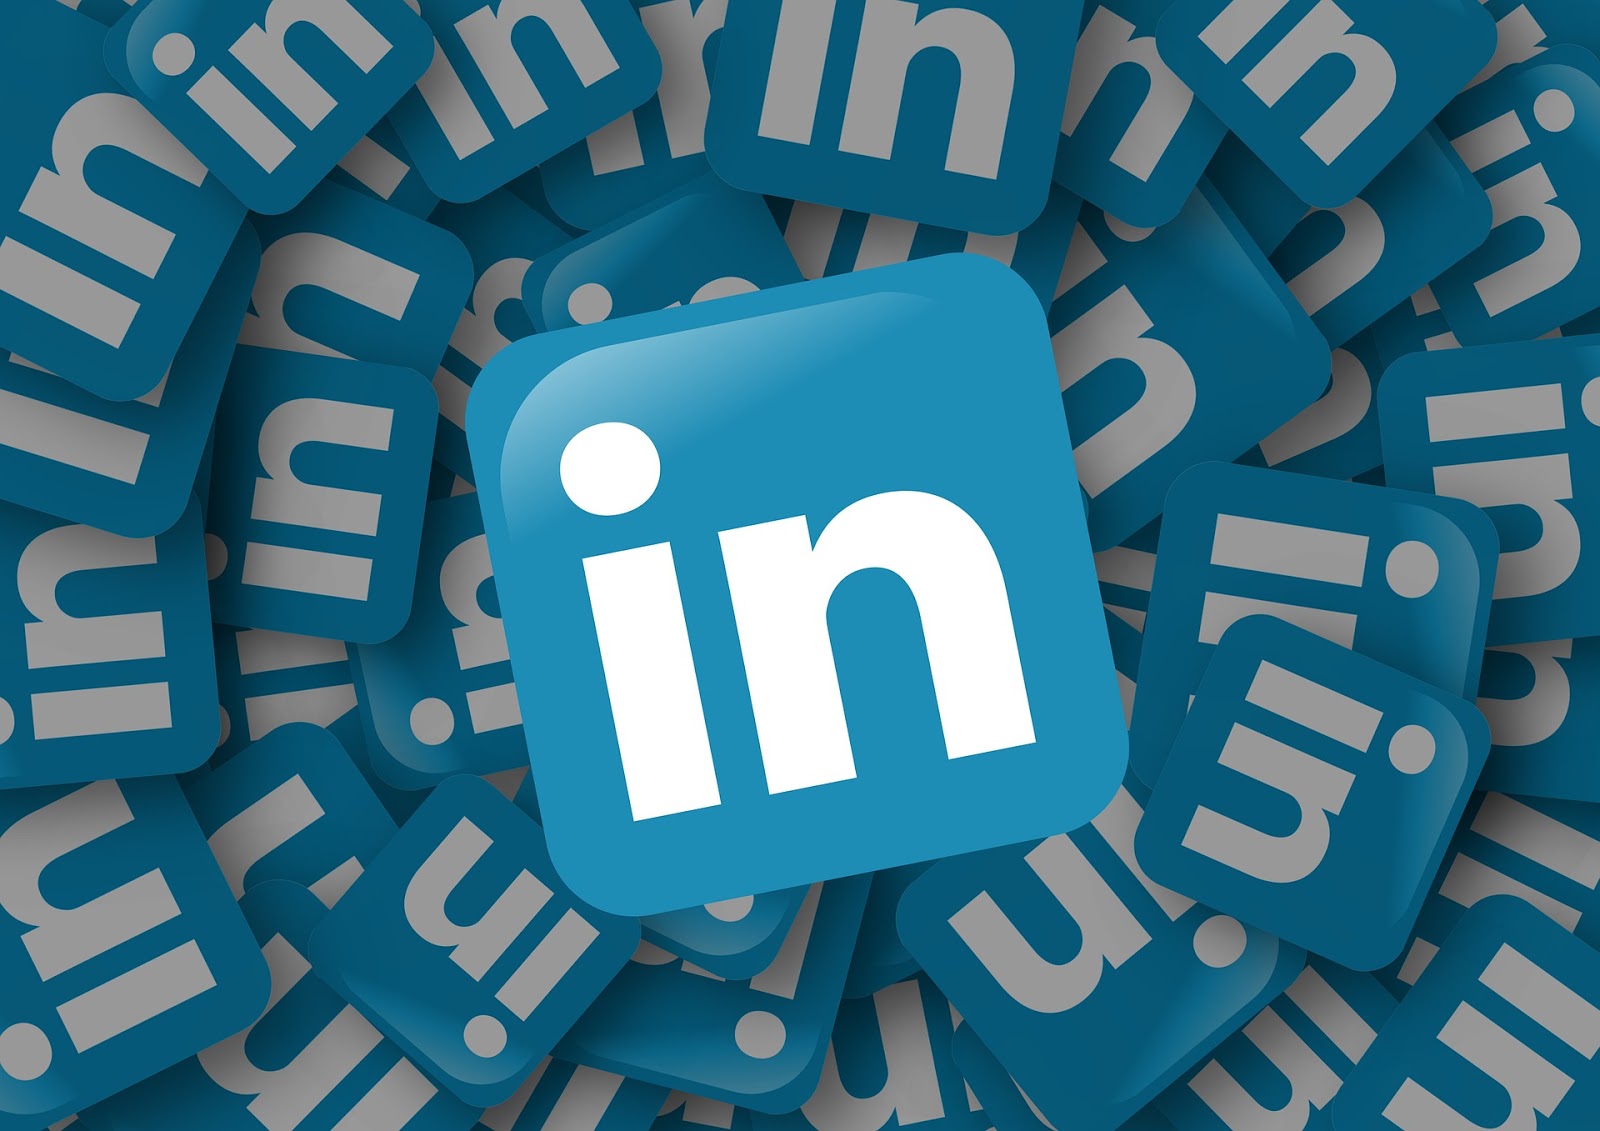 5564I can help you to update your LinkedIn profile!